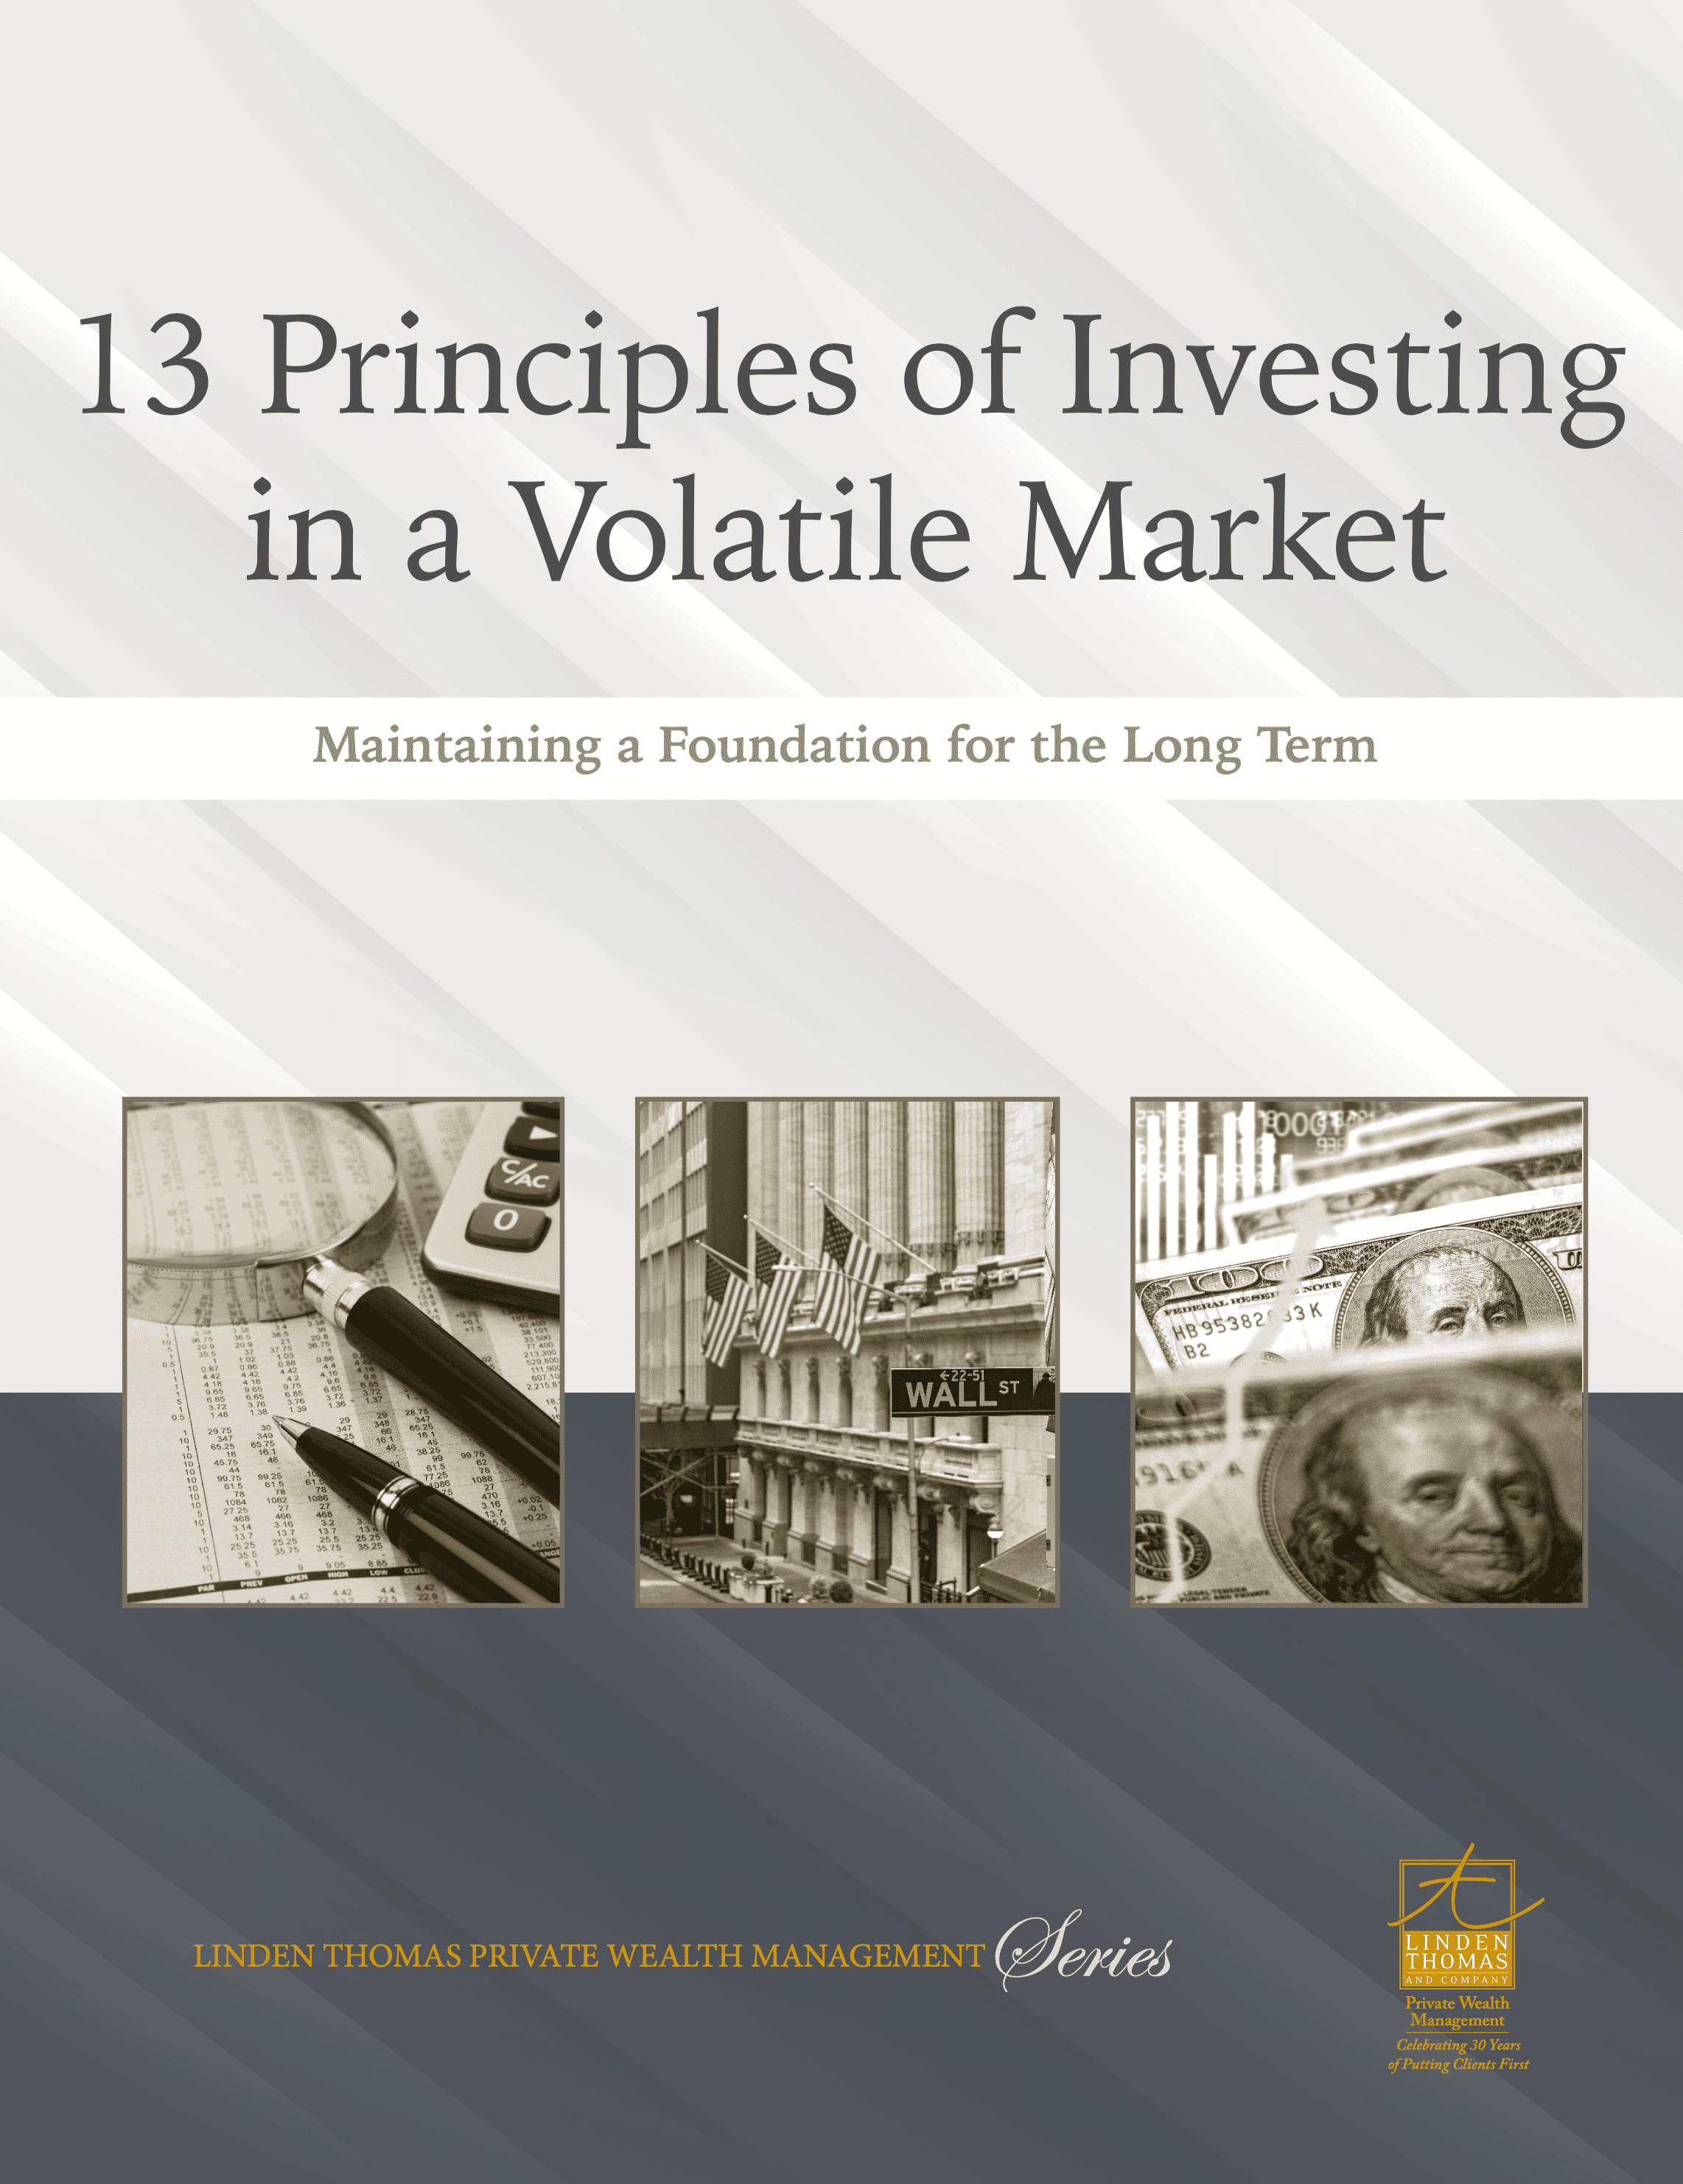 13 Principles of Investing in a Volatile Market